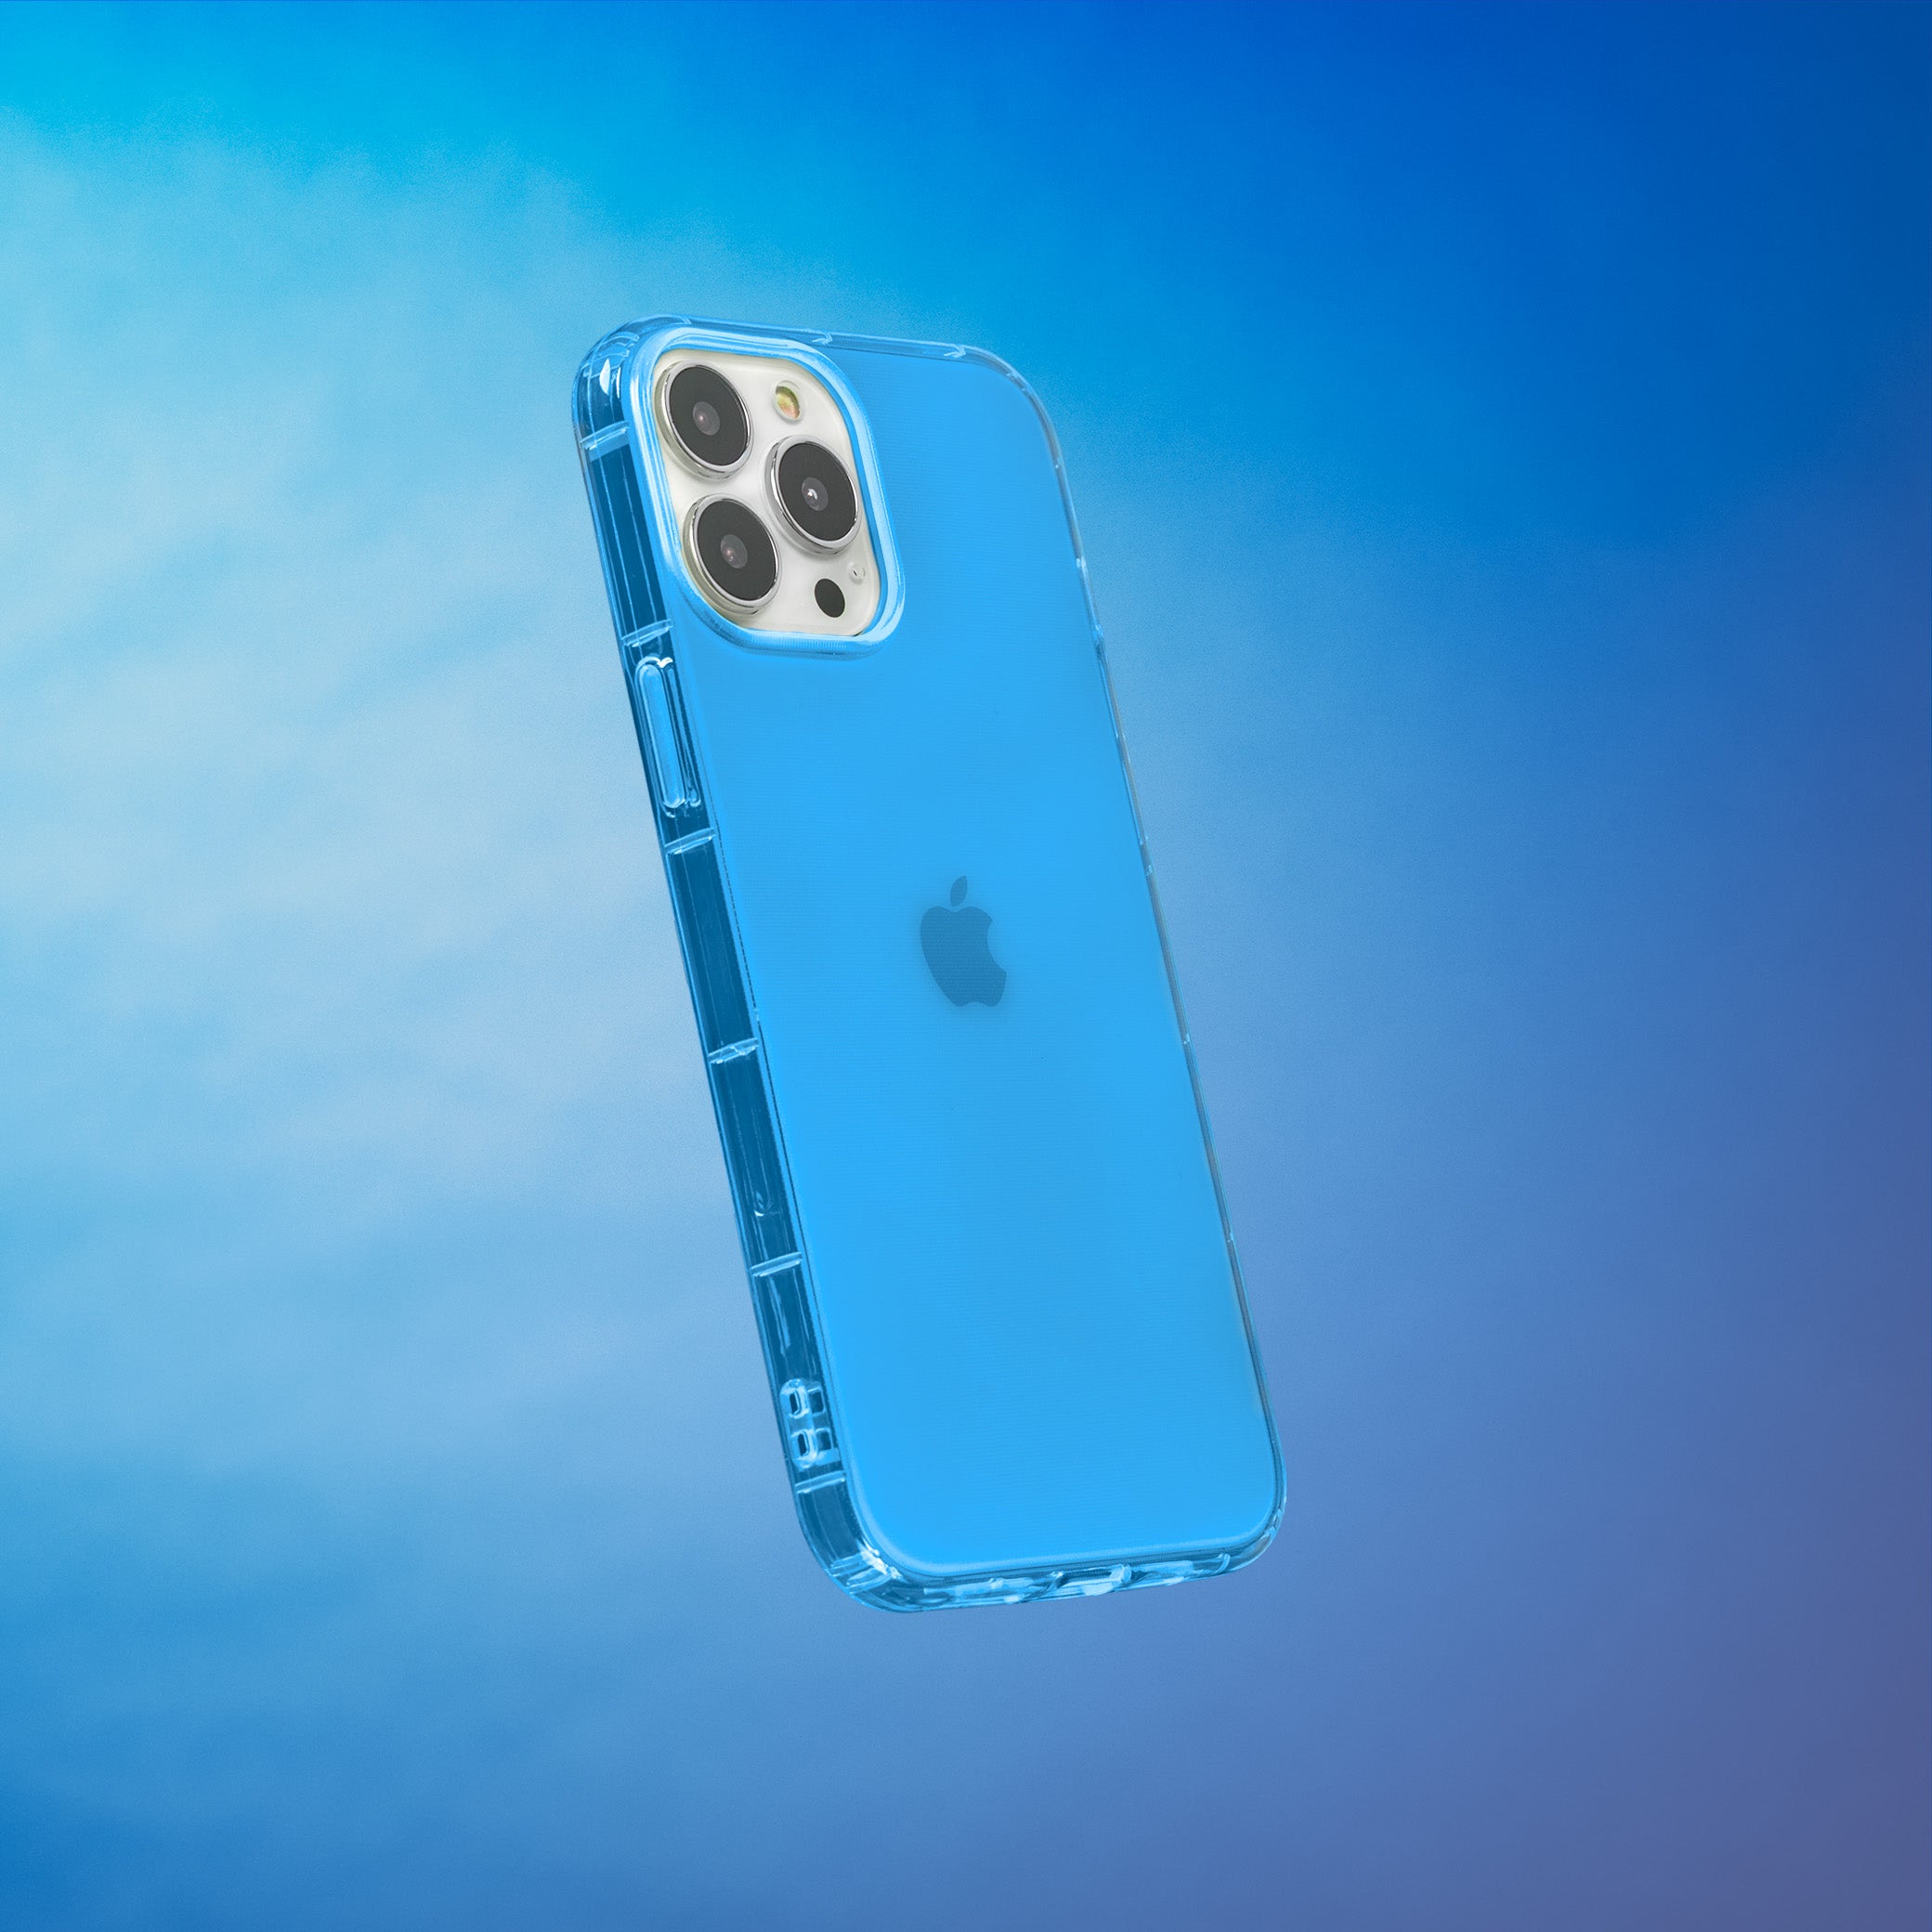 Highlighter Case for iPhone 13 Pro Max - Elevated Azure Blue